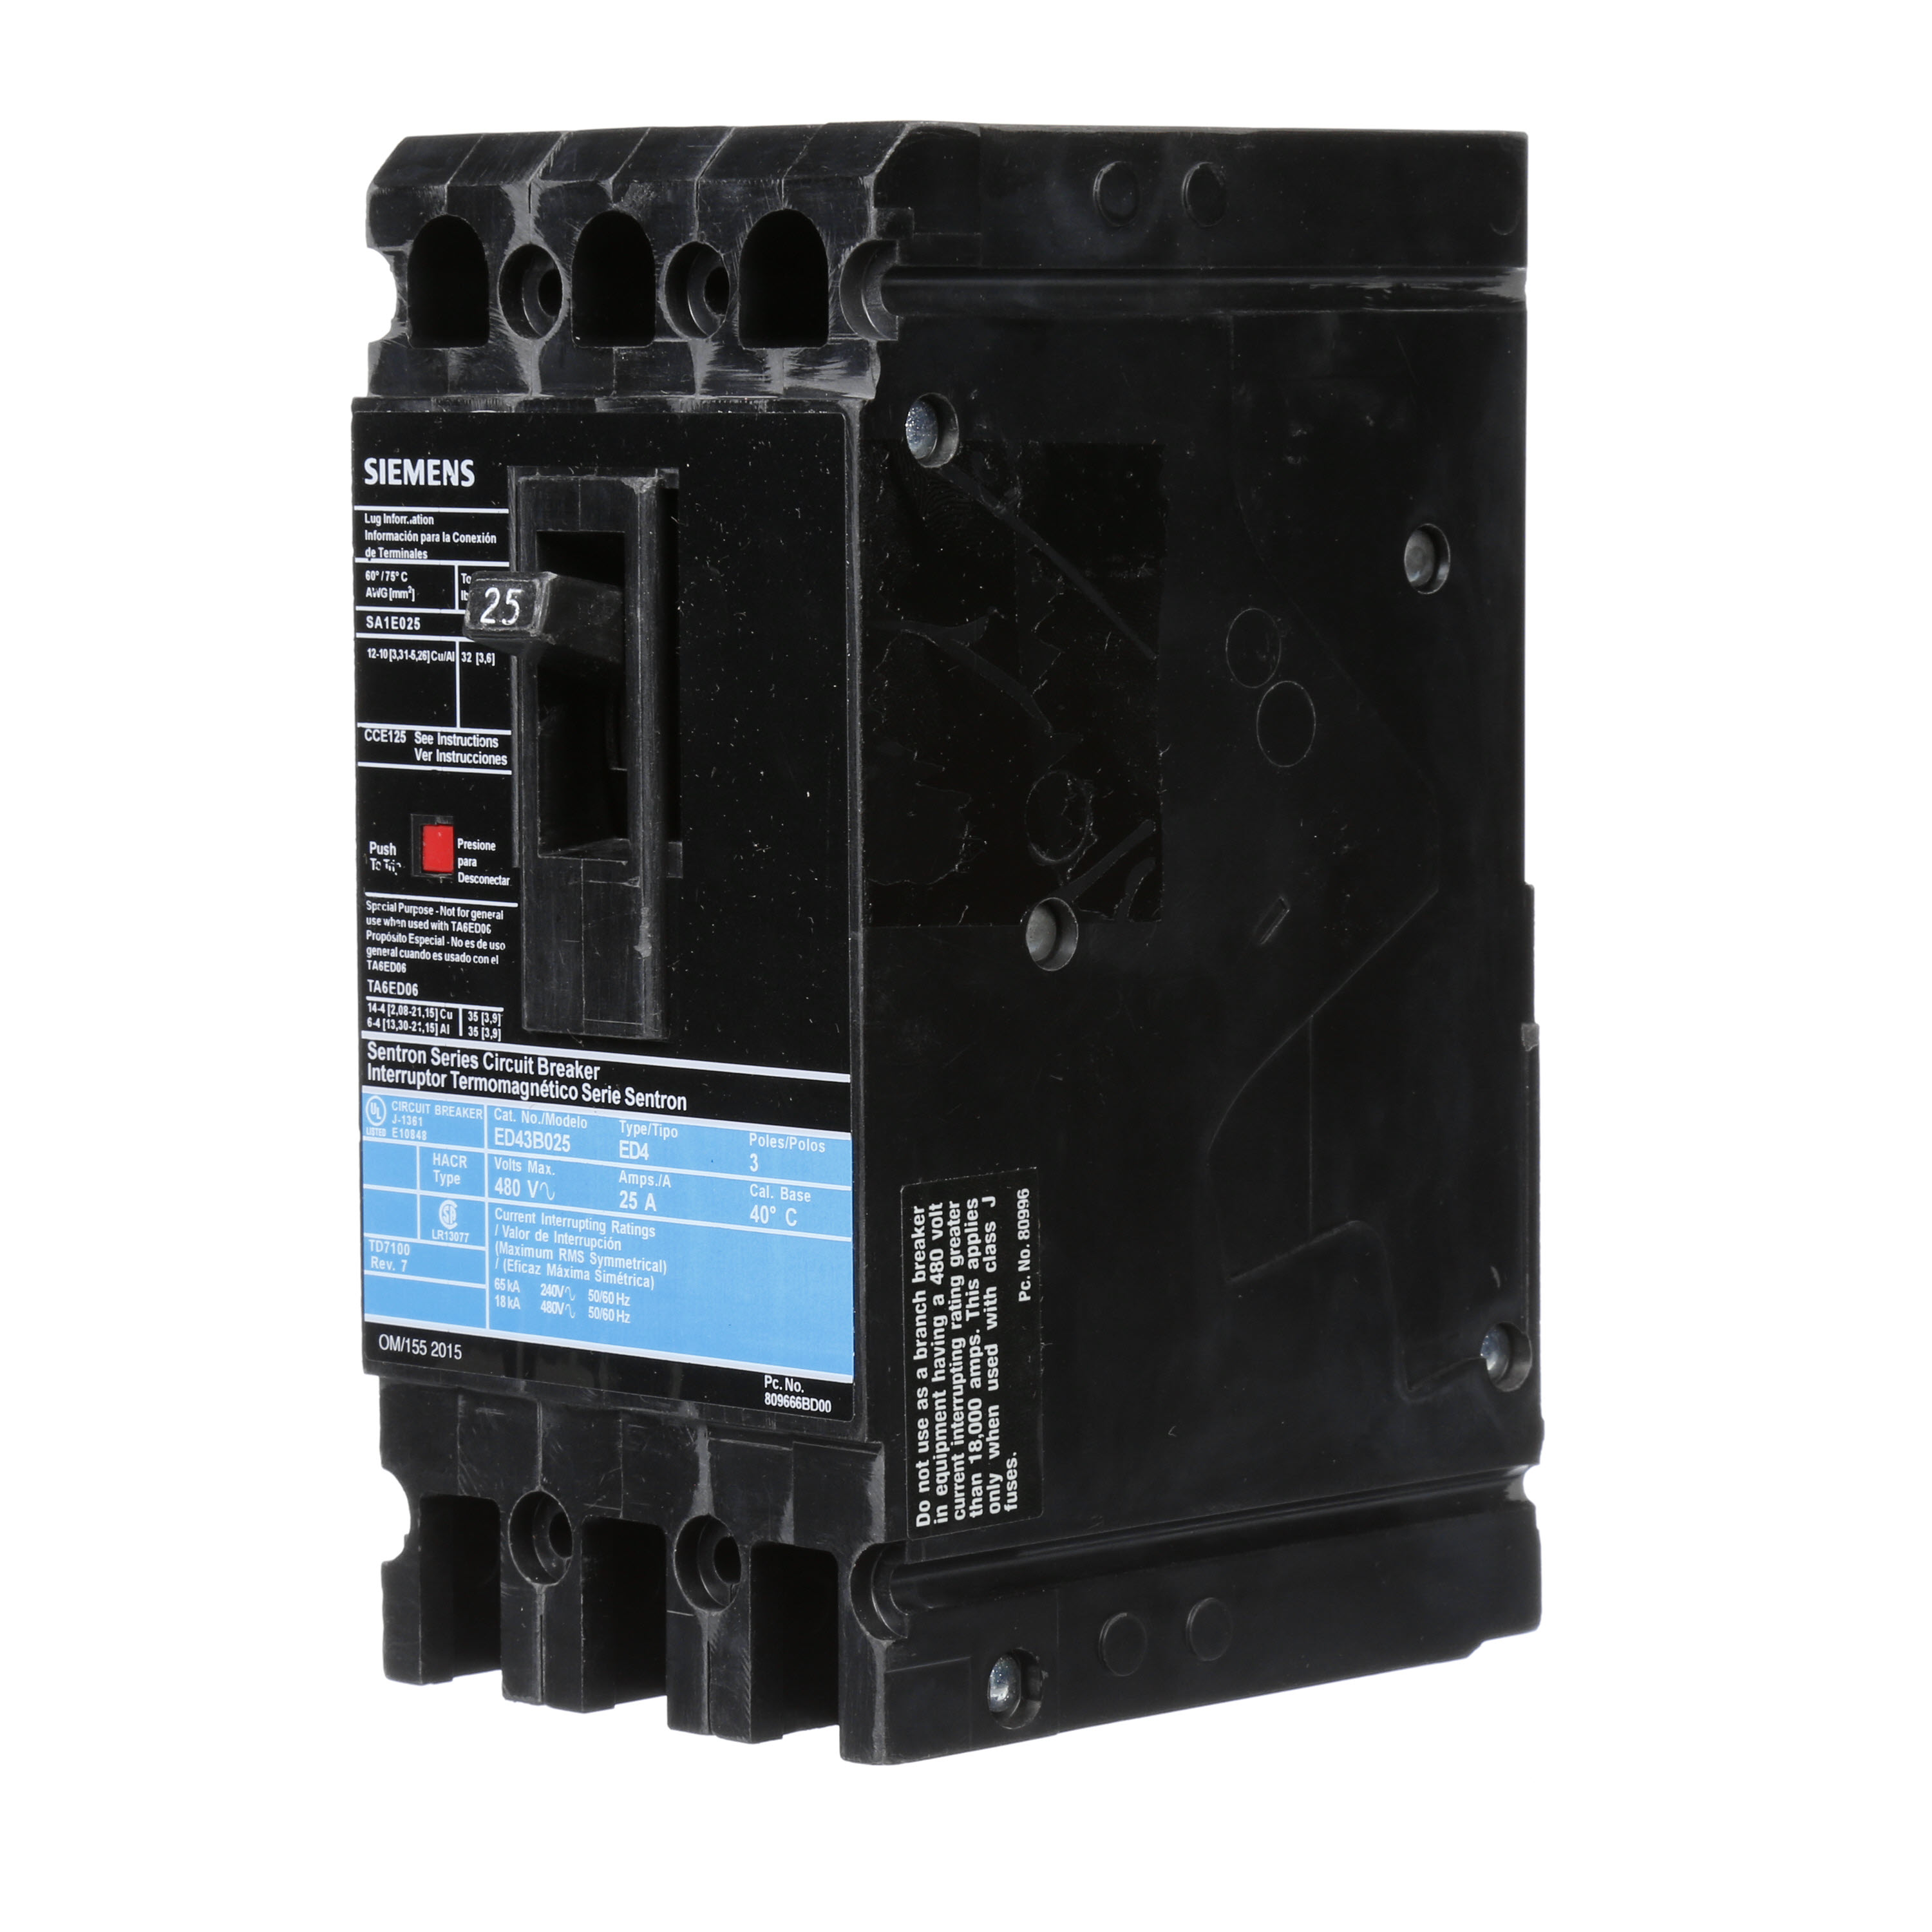 SIEMENS LOW VOLTAGE SENTRON MOLDED CASE CIRCUIT BREAKER WITH THERMAL - MAGNETICTRIP UNIT. STANDARD 40 DEG C BREAKER ED FRAME WITH STANDARD BREAKING CAPACITY. 25A 3-POLE (18KAIC AT 480V). NON-INTERCHANGEABLE TRIP UNIT. SPECIAL FEATURES LINE AND LOAD SIDE LUGS (SA1E025) WIRE RANGE 14 - 10AWG (CU) / 12 - 10AWG (AL). DIMENSIONS (W x H x D) IN 3.00 x 6.4 x 3.92.